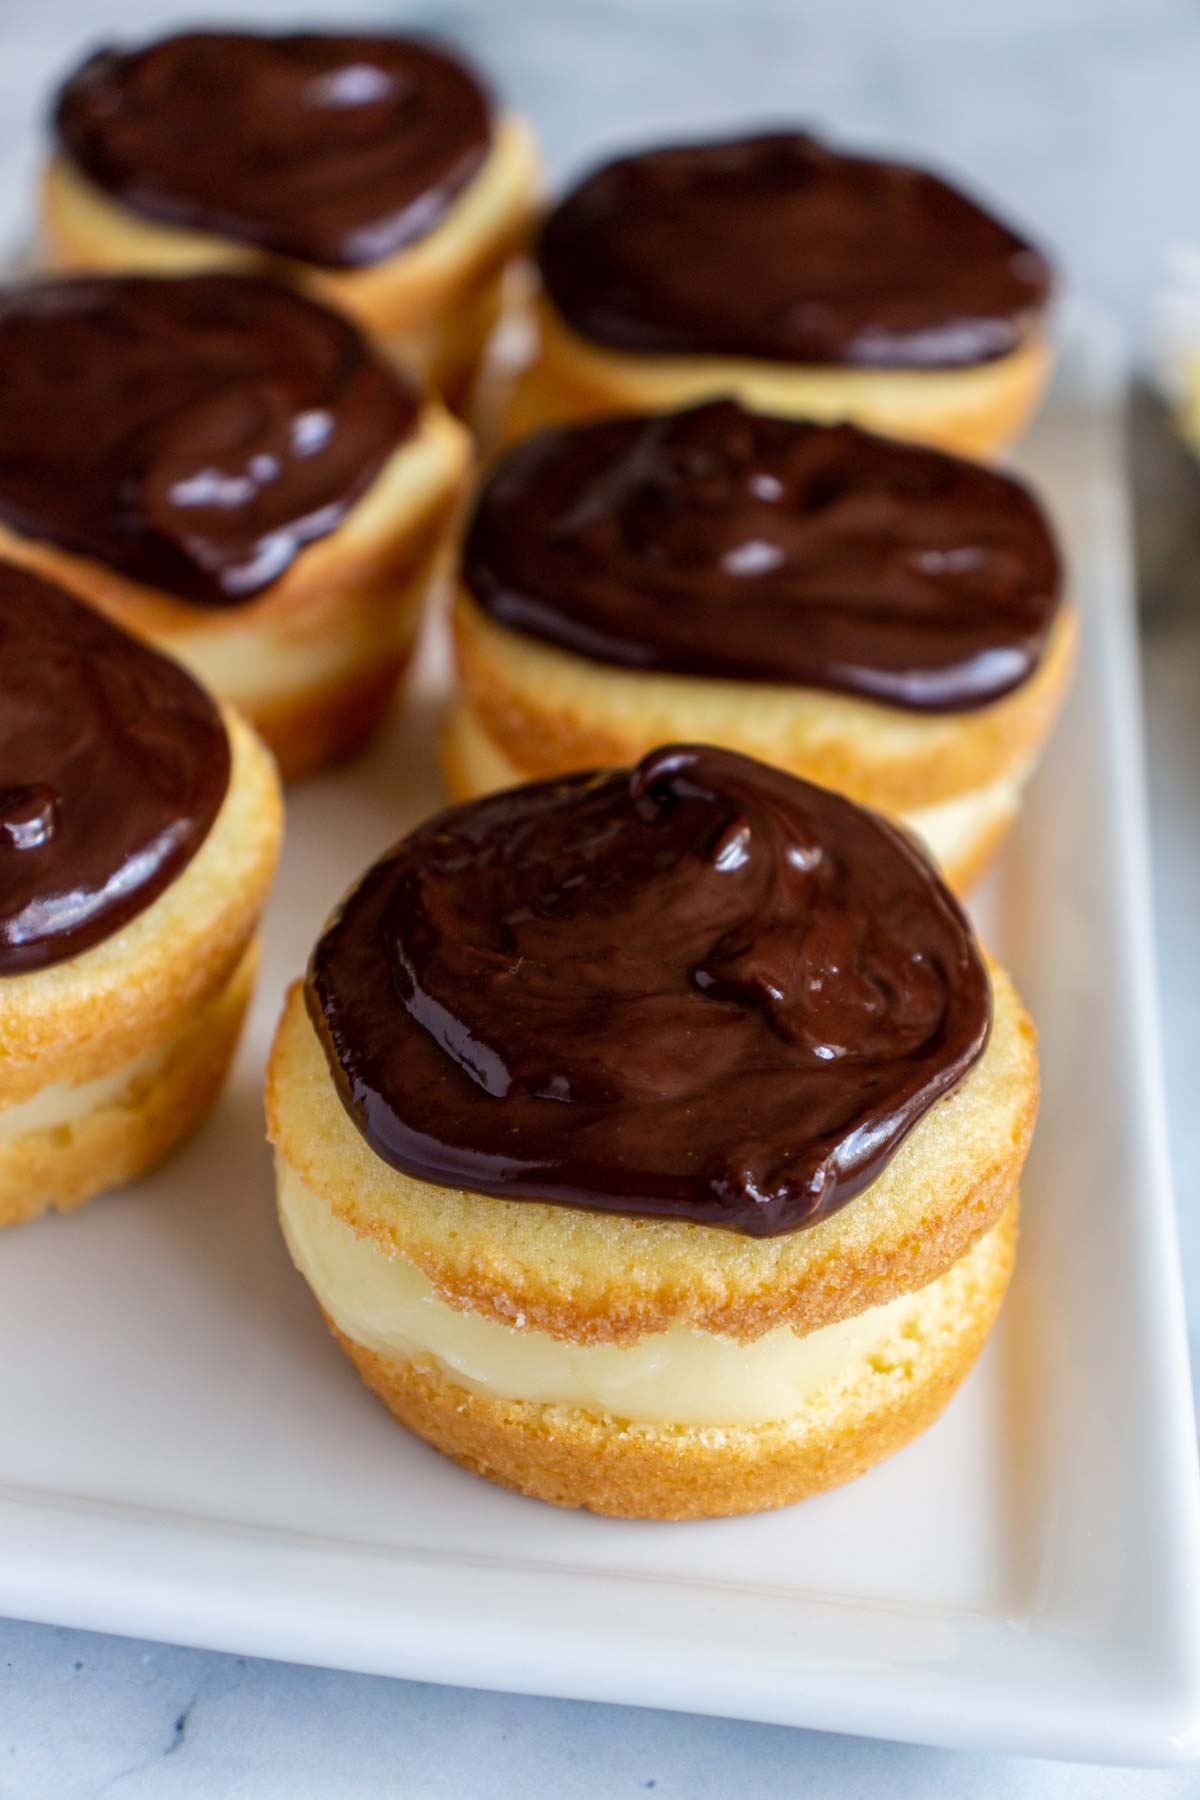 Six Boston cream pie cupcakes arranged in two rows on a white rectangular plate.